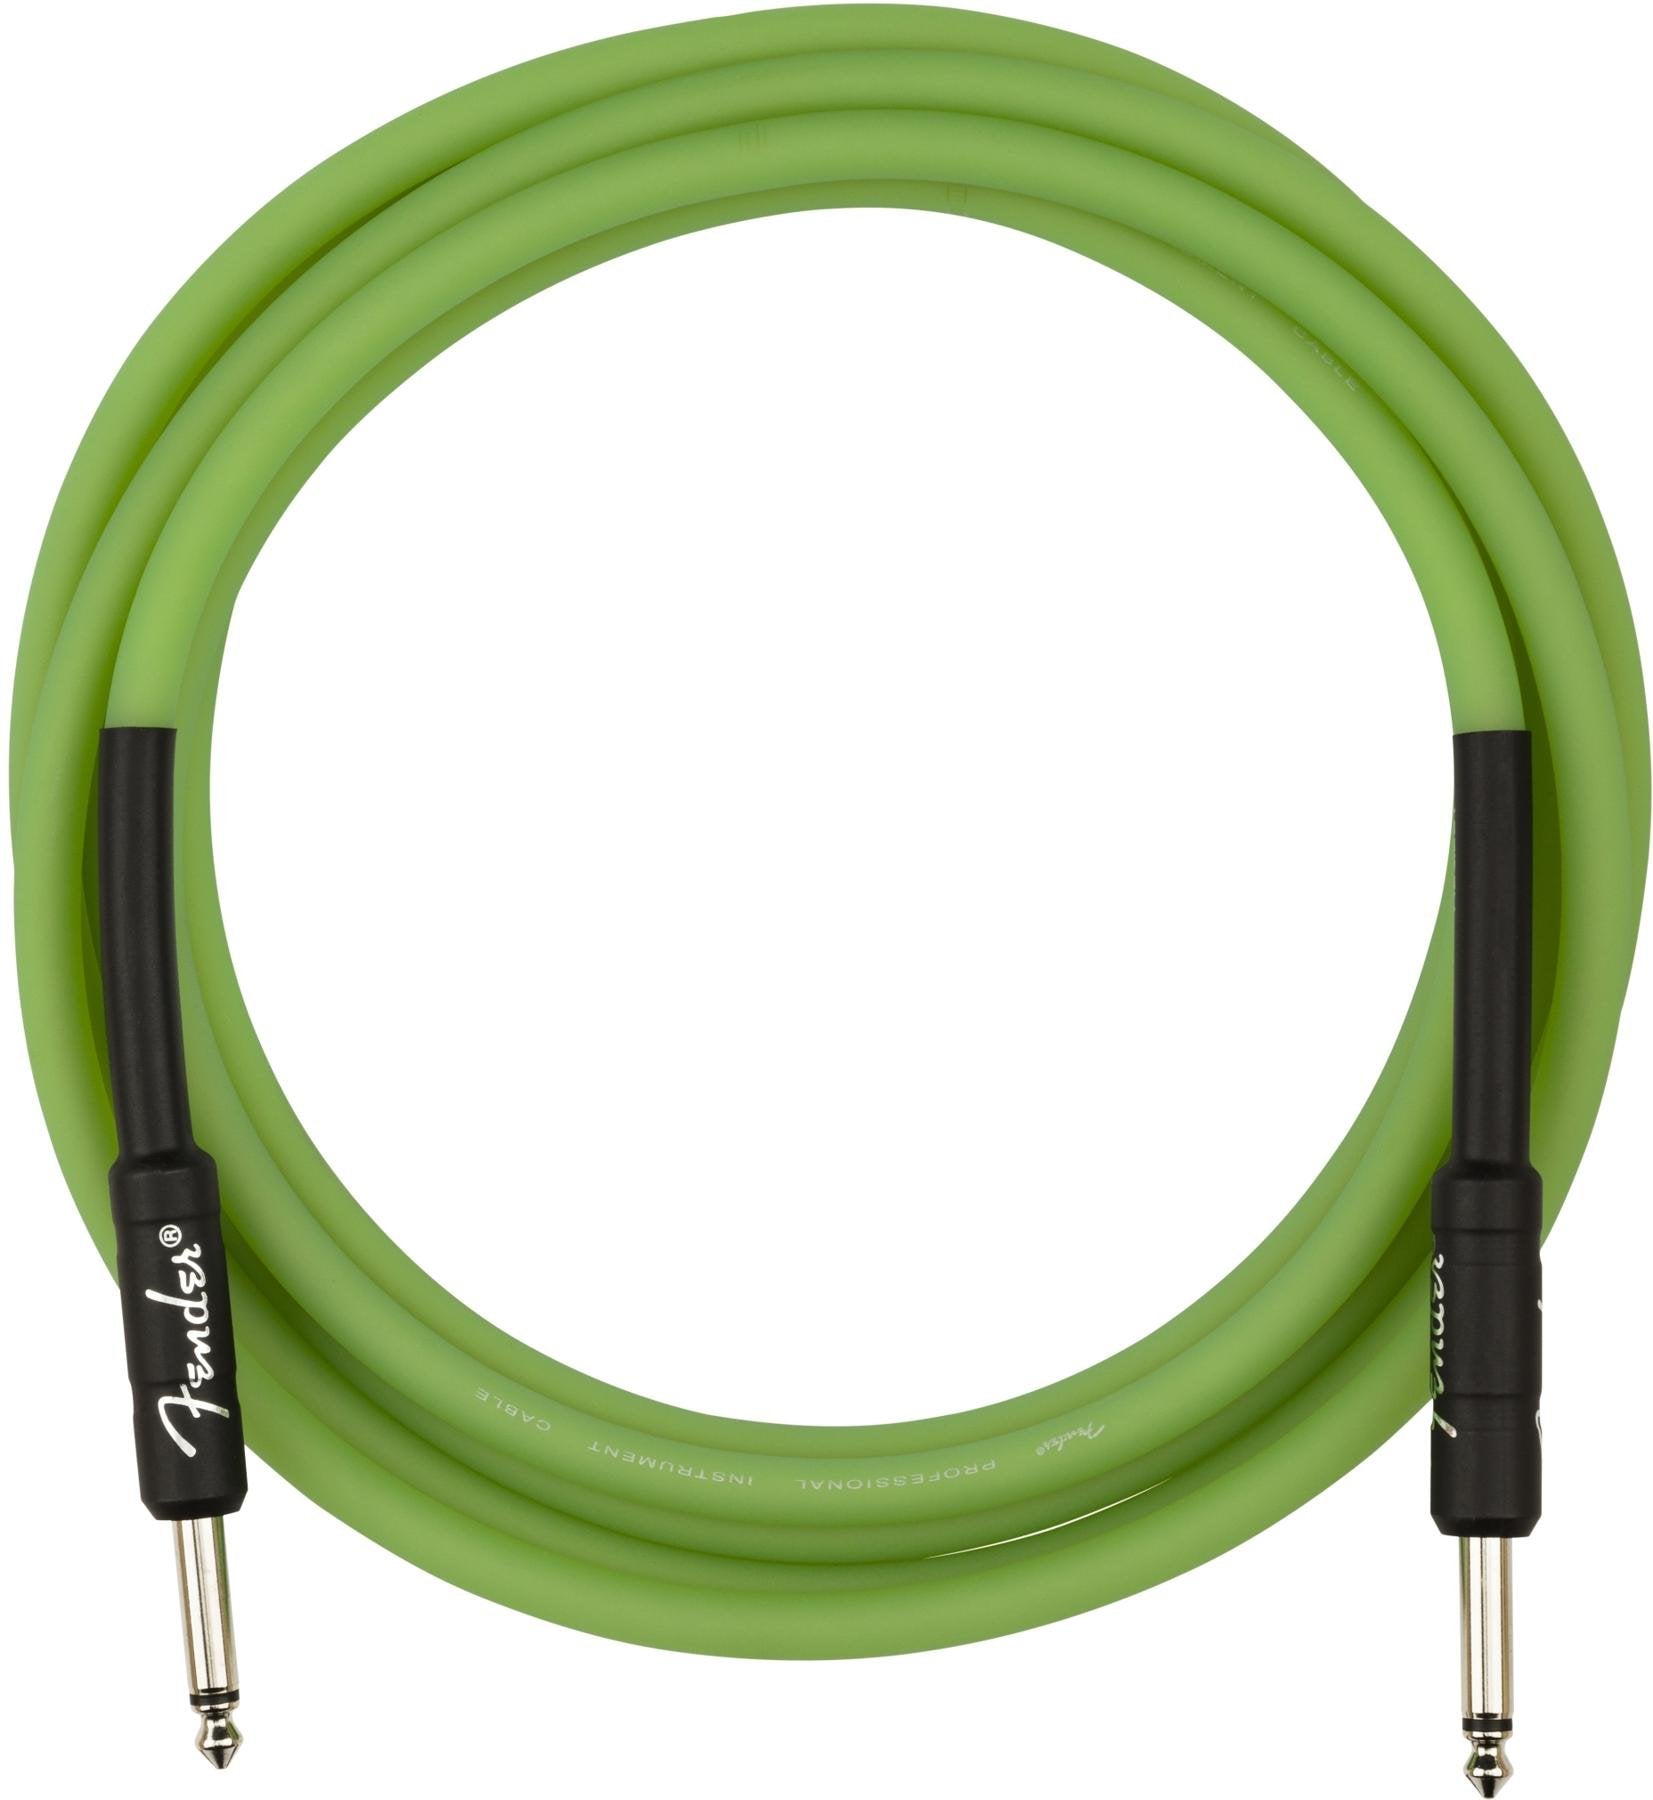 Fender Professional Series Glow in the Dark Green Instrument Cable - 10ft.